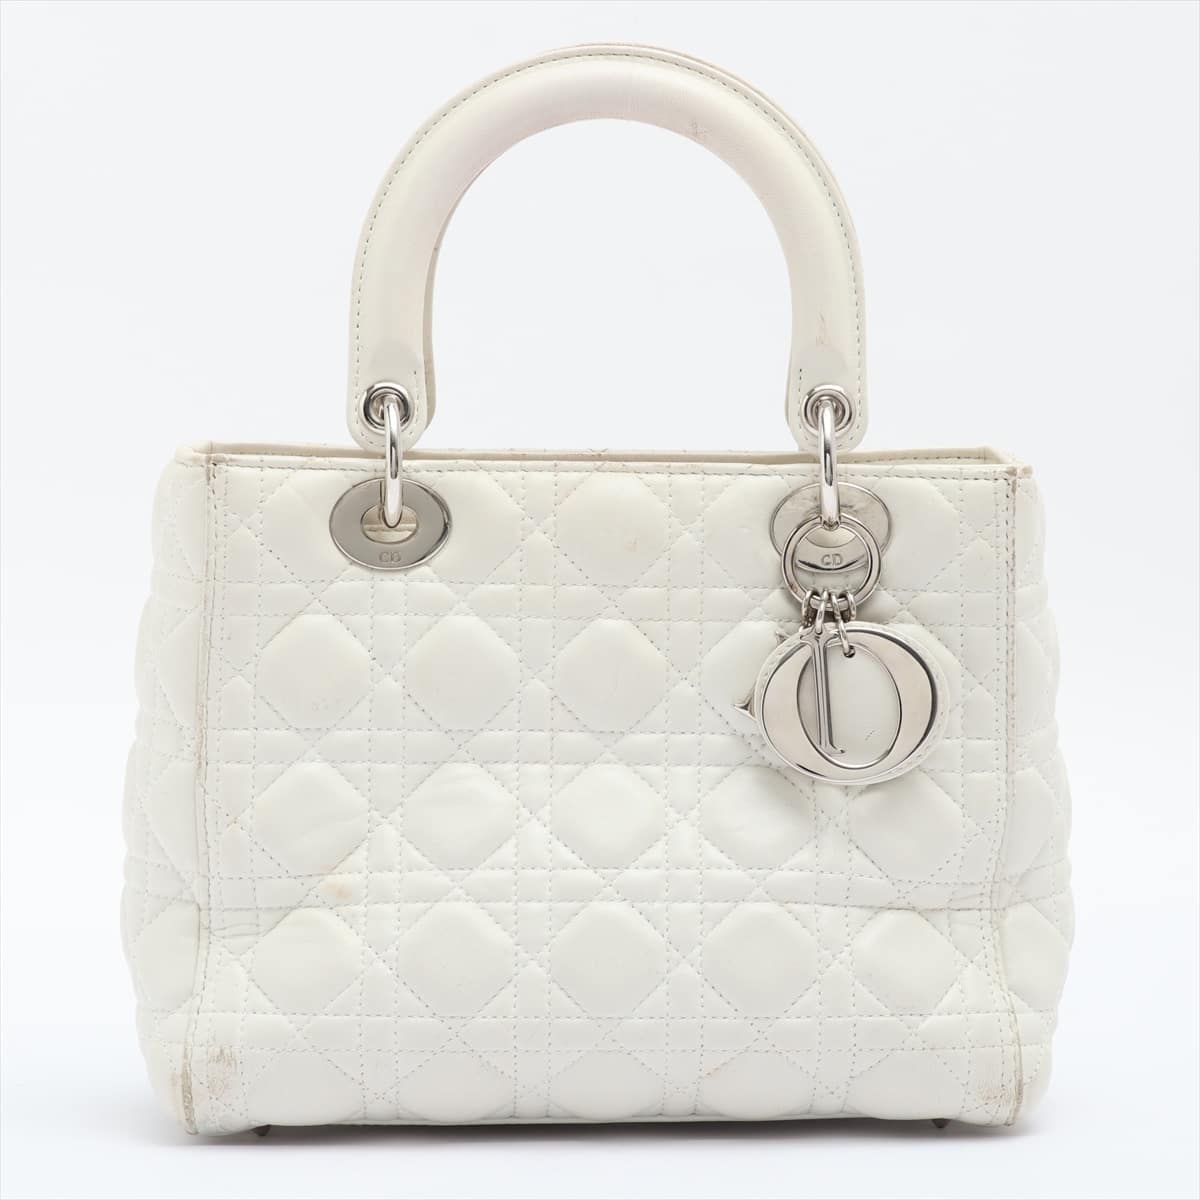 Christian Dior Lady Dior Cannage Leather Hand bag White